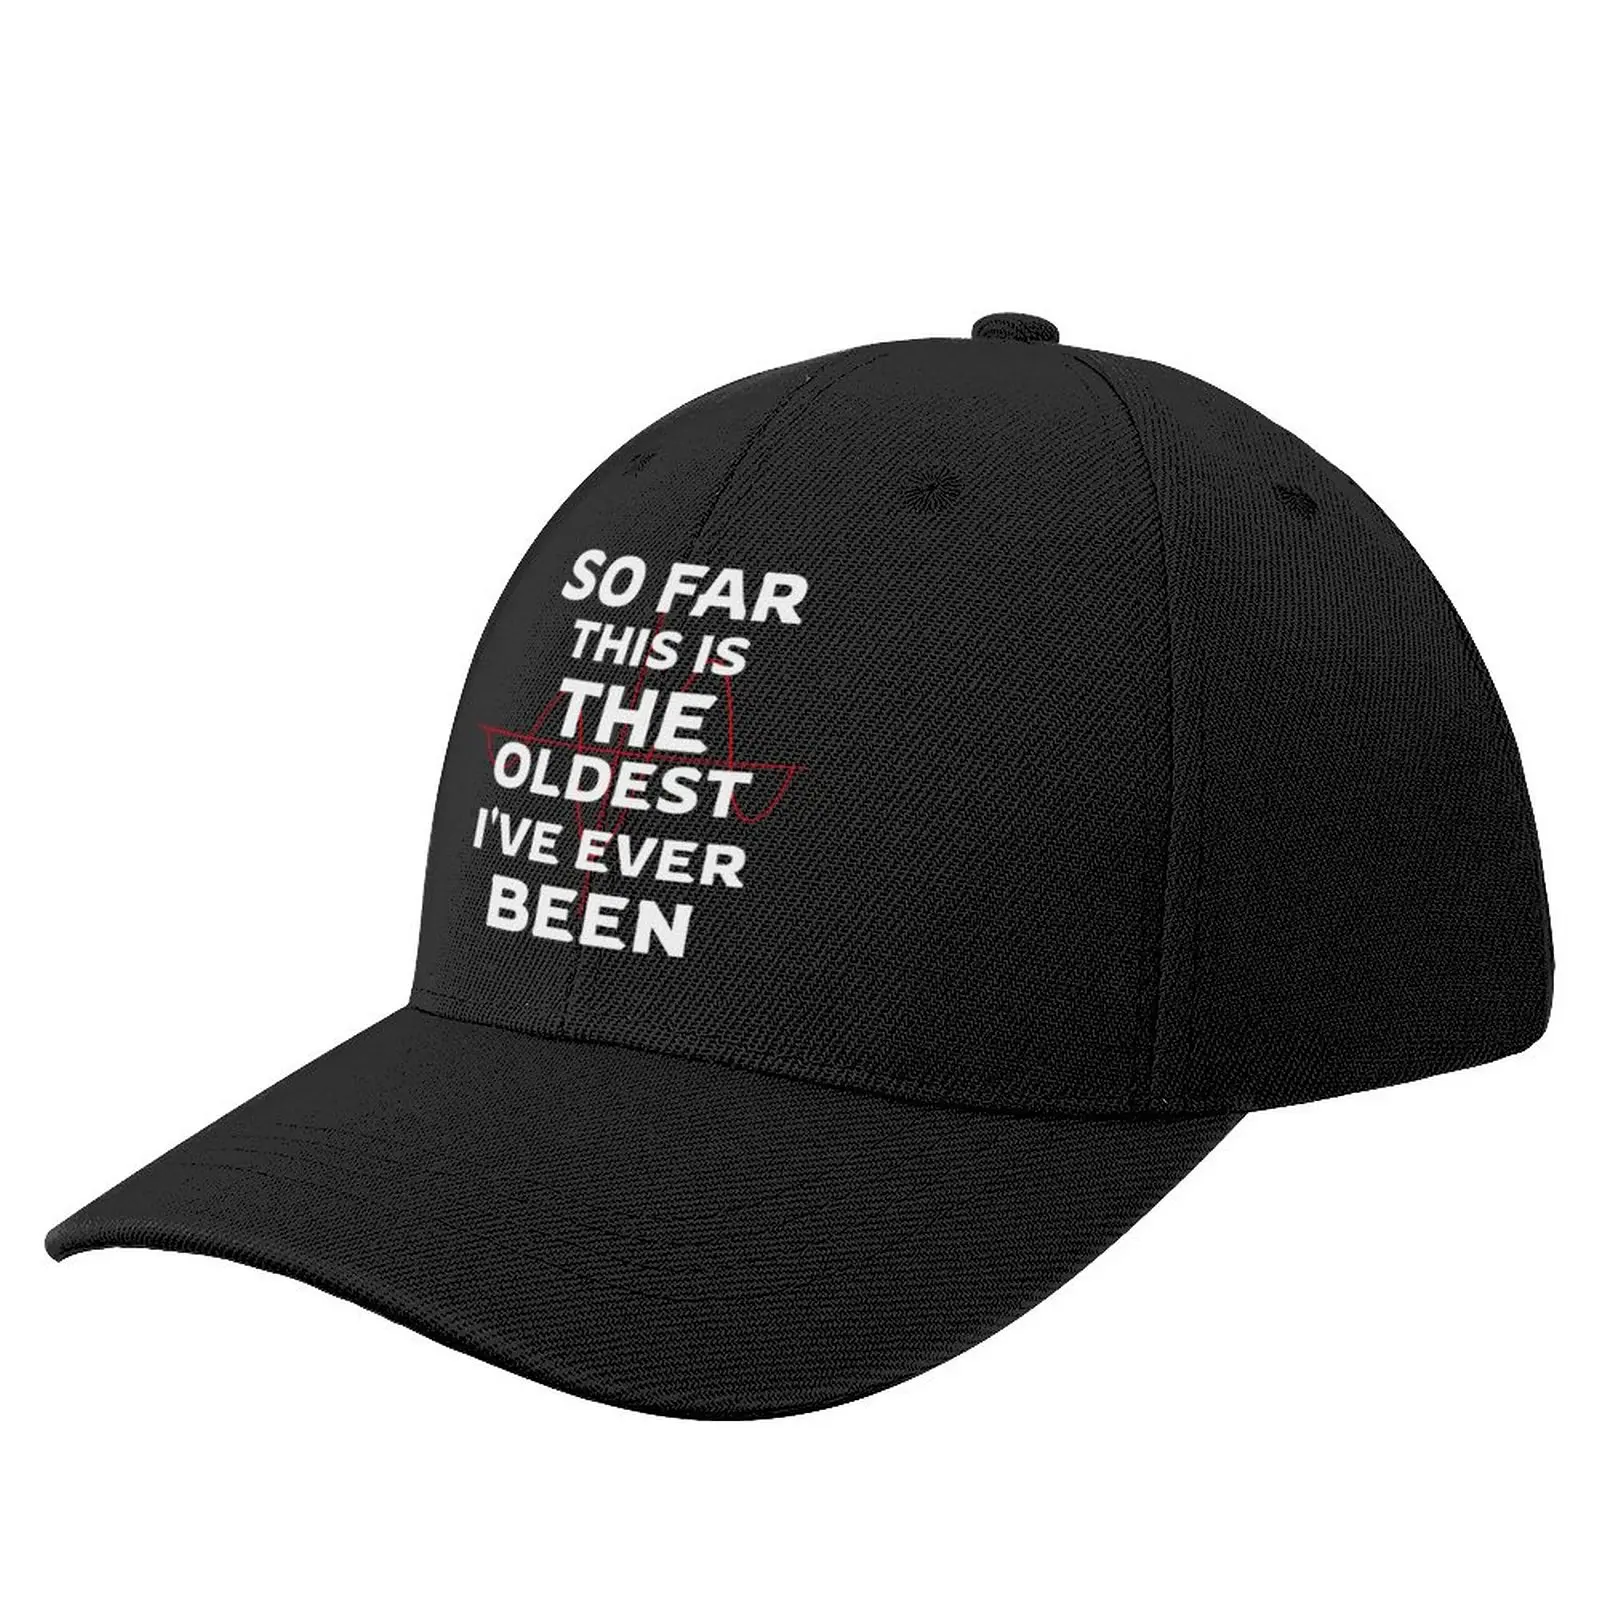 

So Far This Is The Oldest Ive Ever Been Baseball Cap Big Size Hat Dropshipping Icon hard hat Women Hat Men's